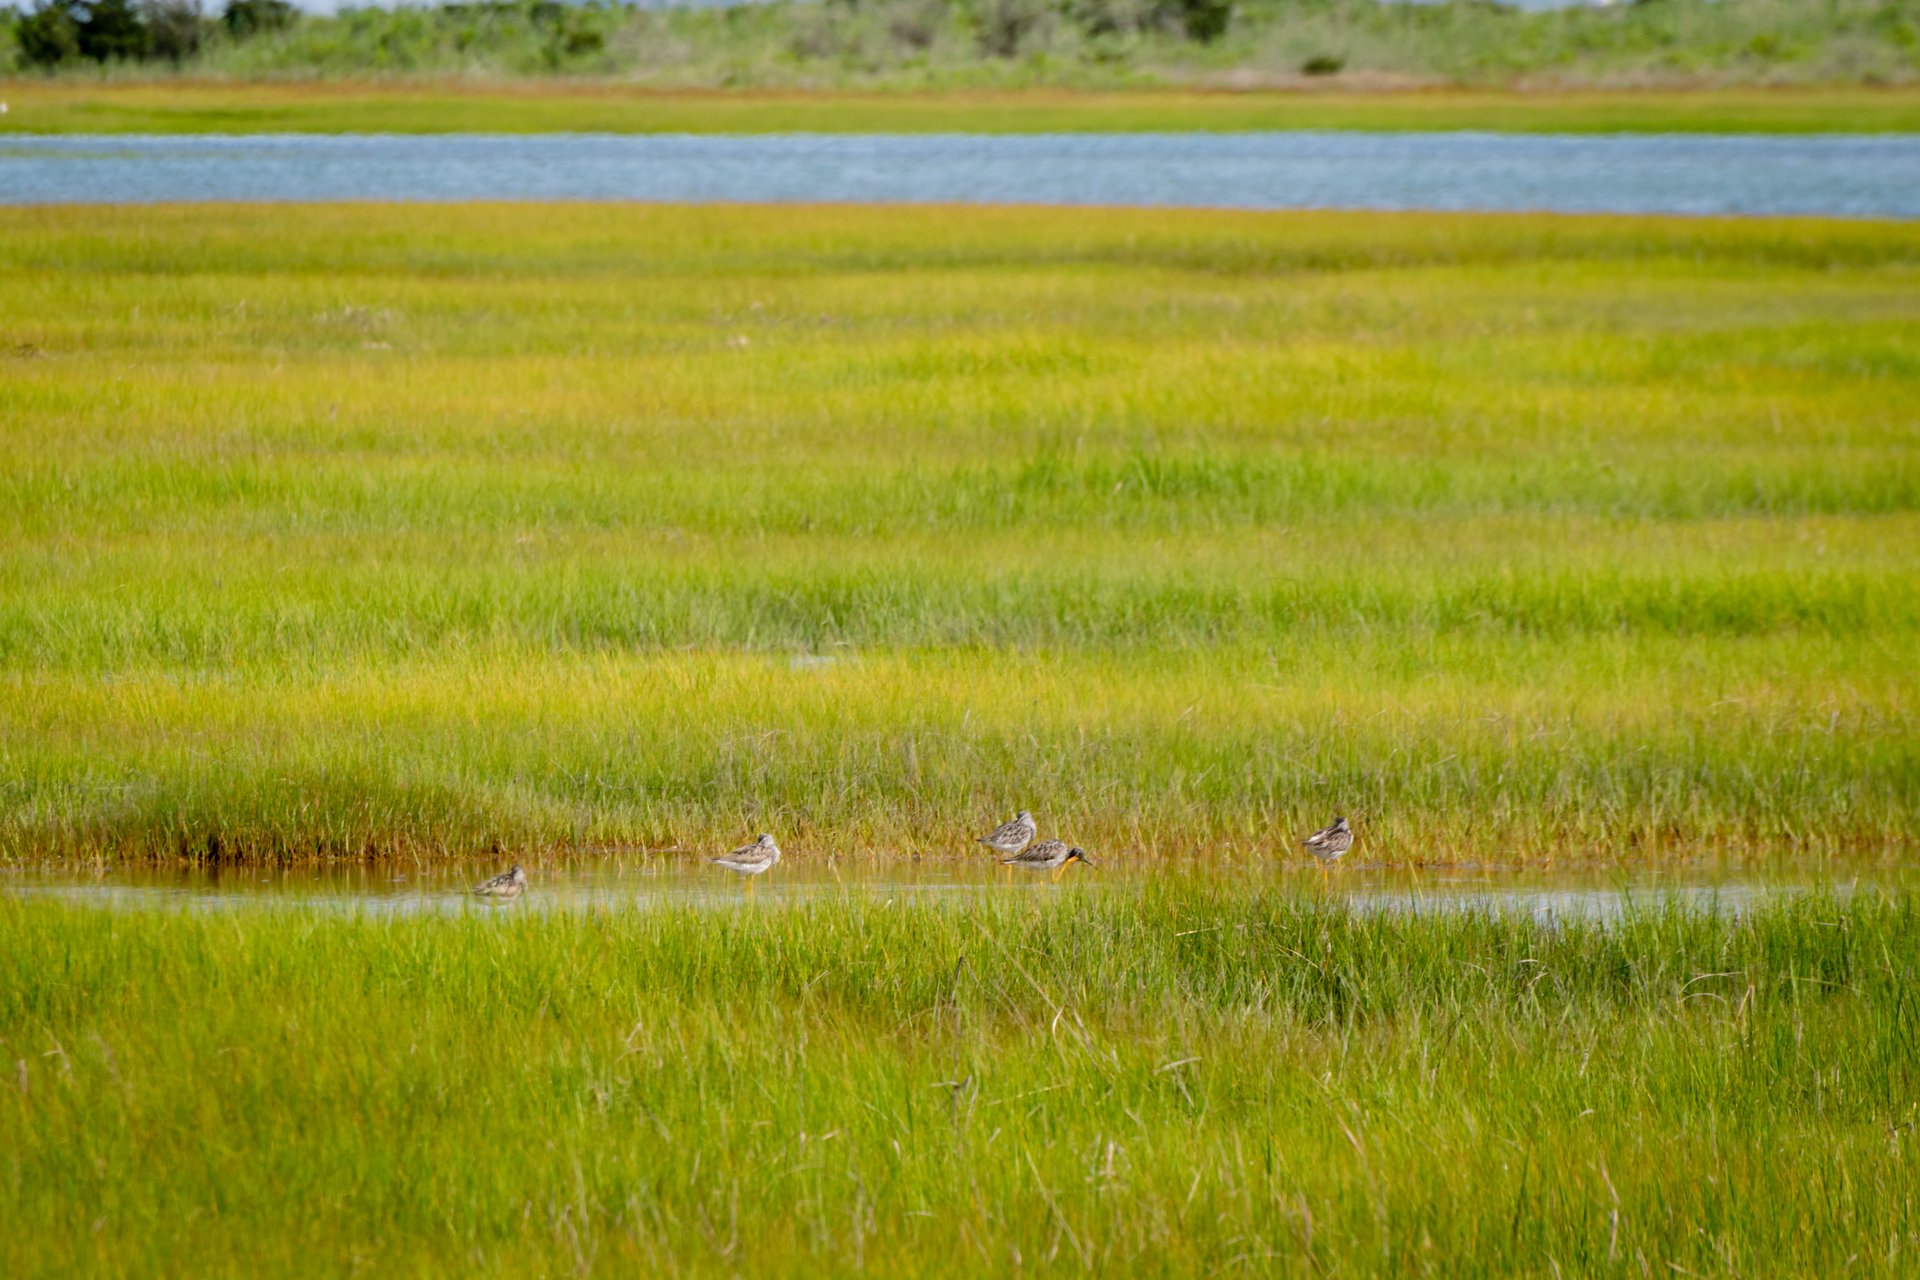 Four small shorebirds standing in a water part of a green saltmarsh. More open water in the background.